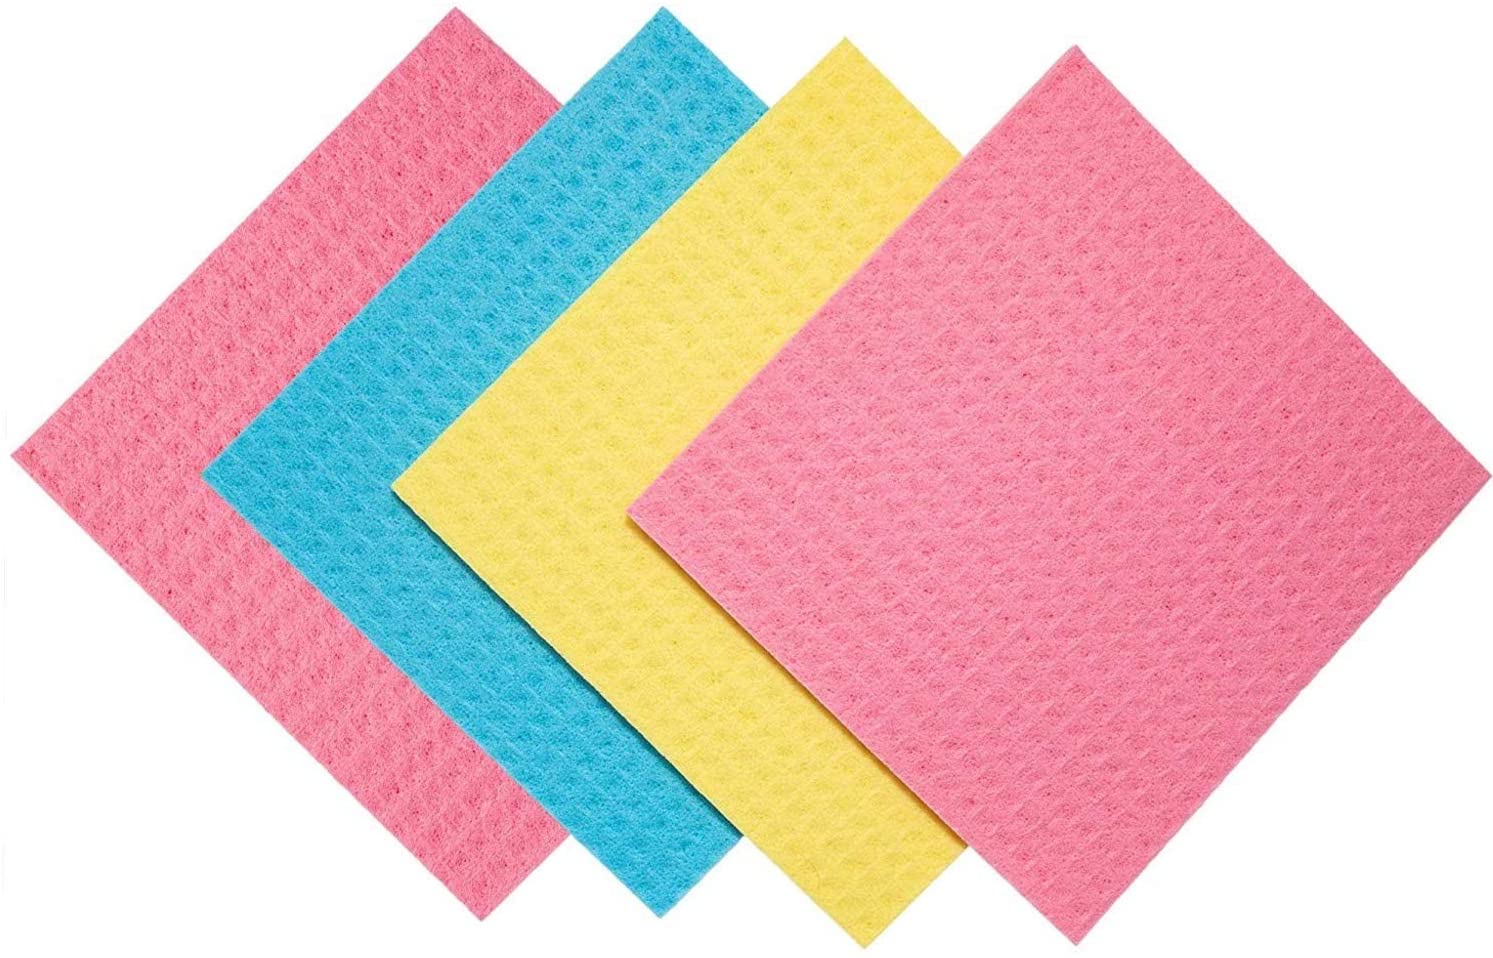 Paperless Kitchen Cleaning Sponge Cloth, 4PK.